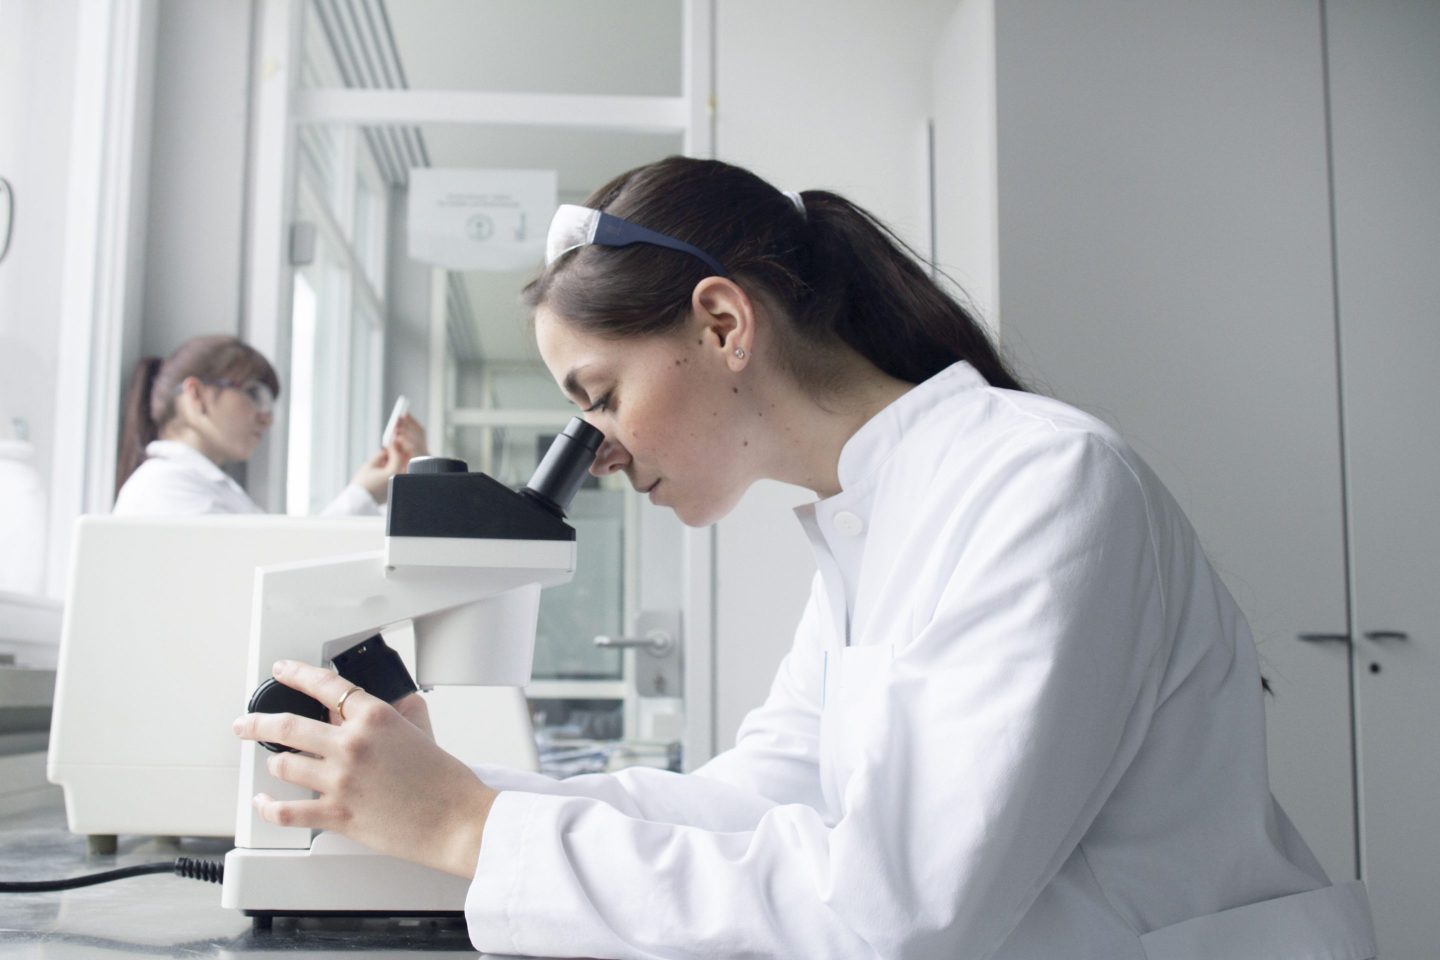 Stock image of a young woman wearing a lab coat and working in a labratory looking at something under a microsope.